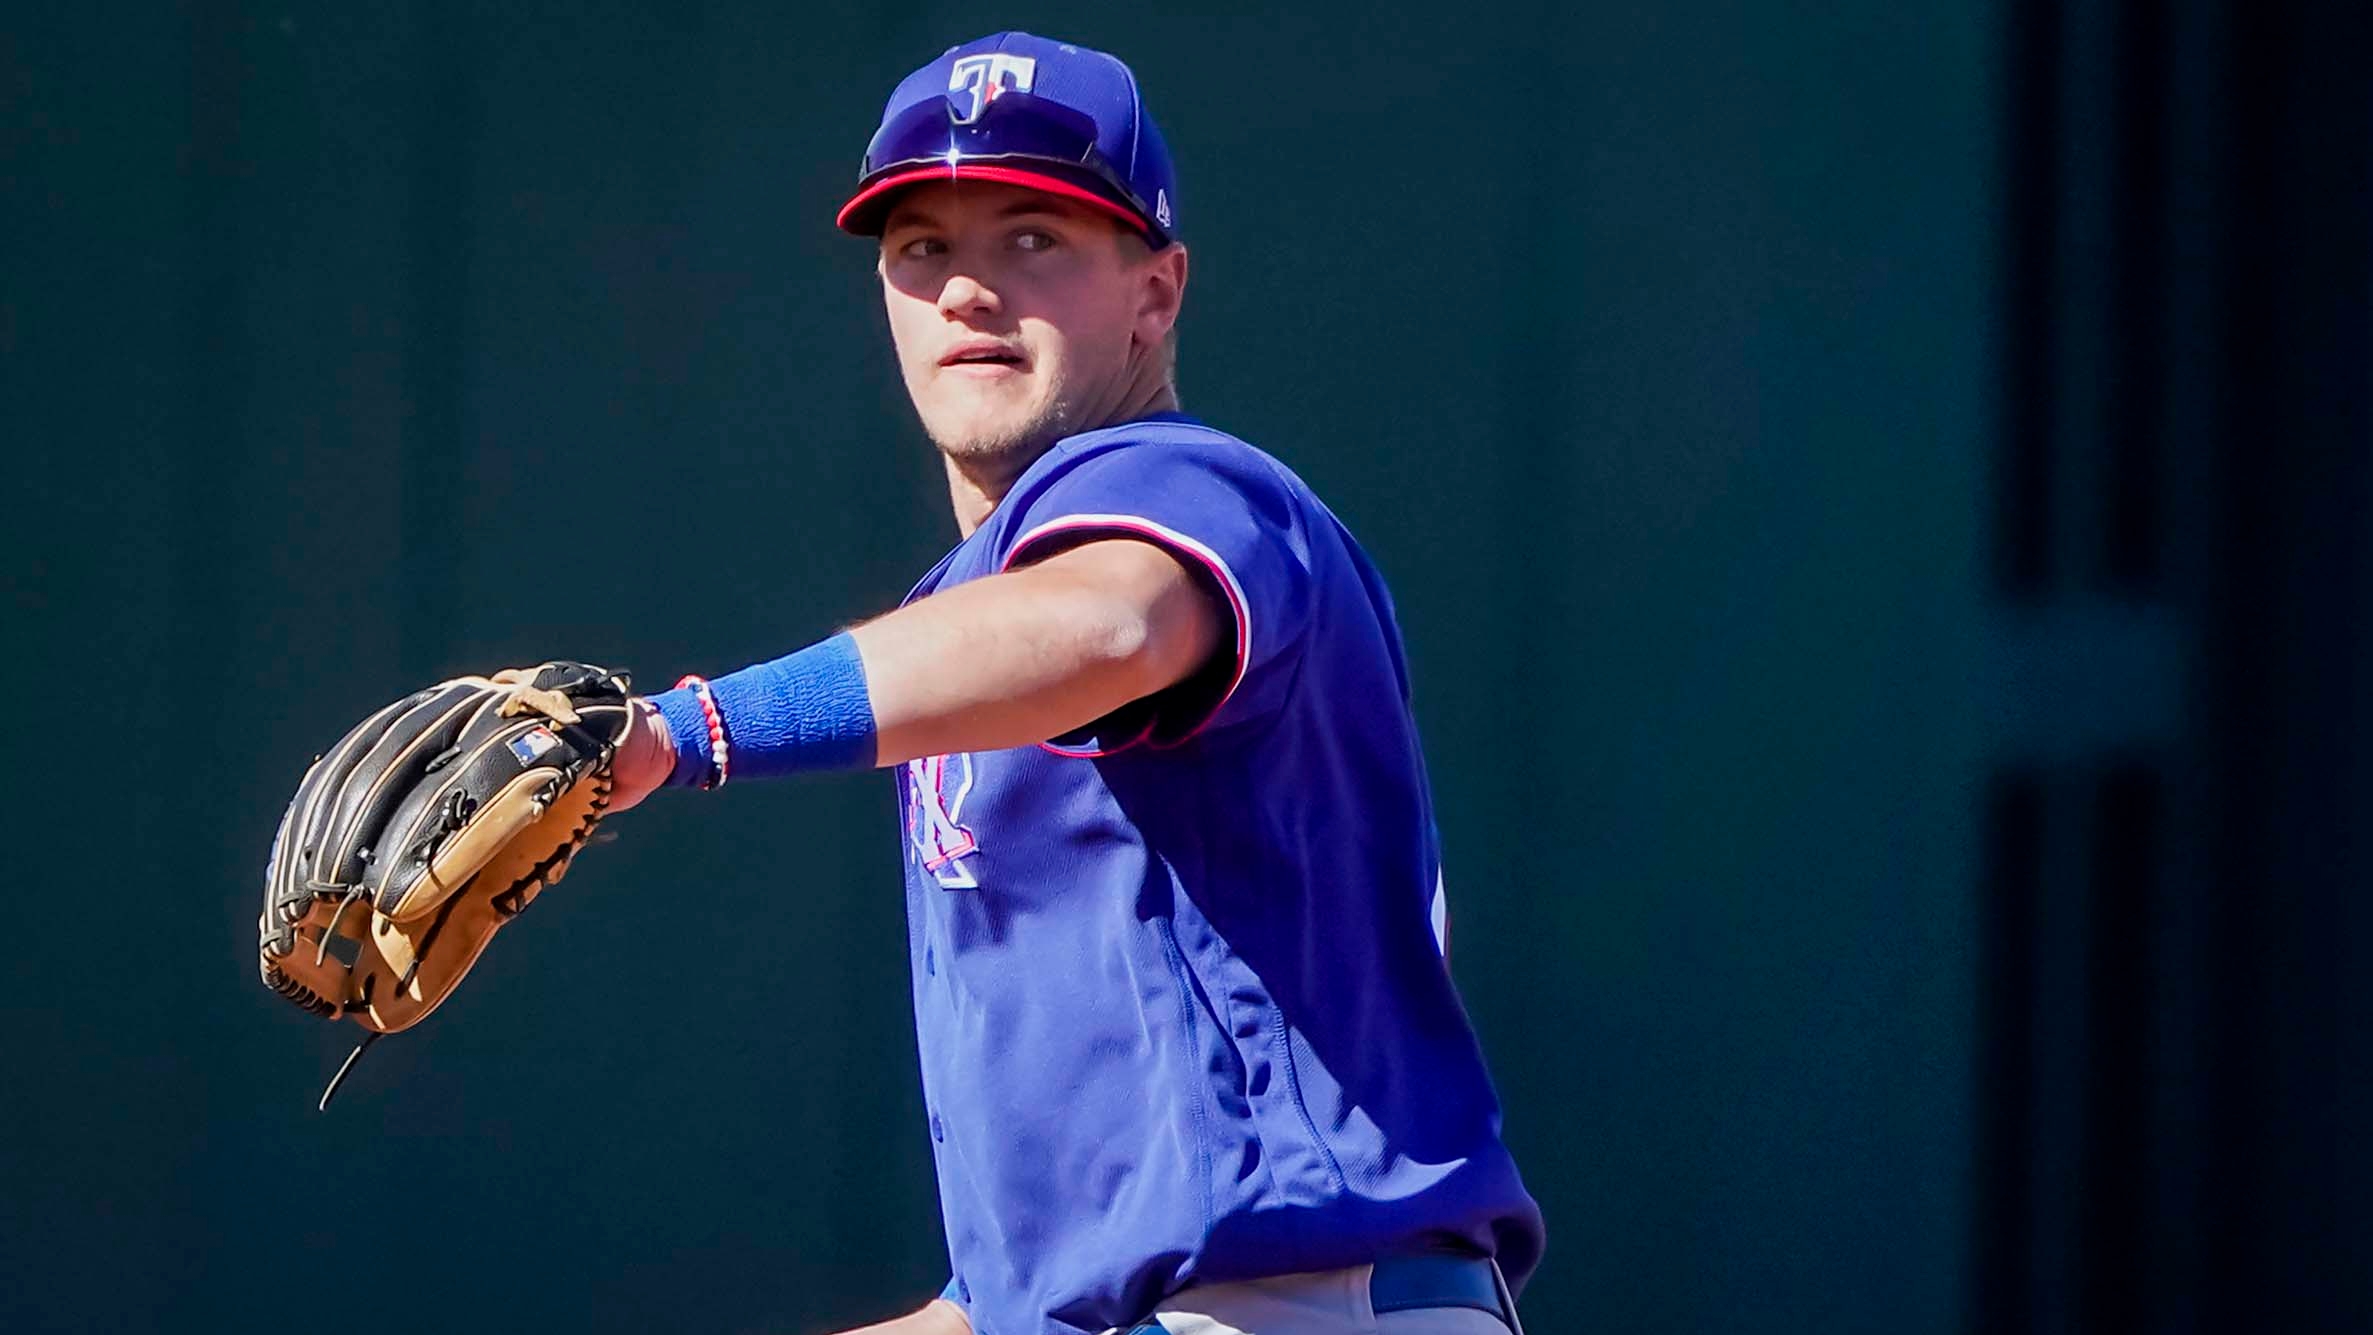 Rangers' top prospect Josh Jung nearing his return, could make 2021 debut  for Frisco next week